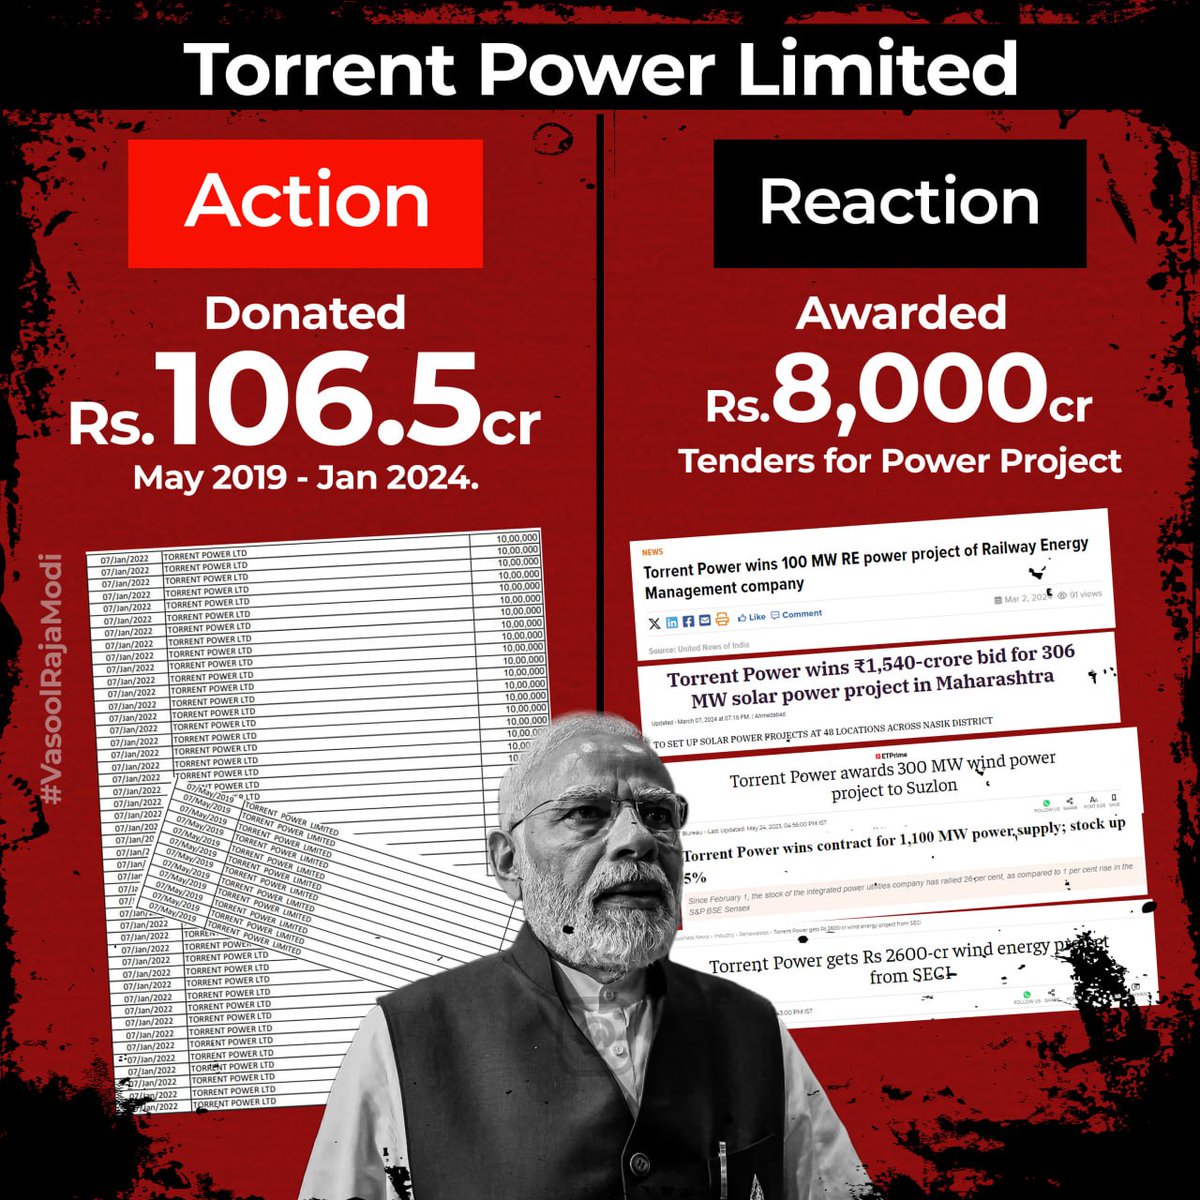 6. From May 2019 till January 2024, Torrent Power Ltd. donated Rs. 106.5 crore to the #BJP through electoral bonds and, in return, got power projects worth Rs. 8,000 crore.
#VasoolRajaModi 
#ElectoralBondScam 
#Torrent
#TorrentPower